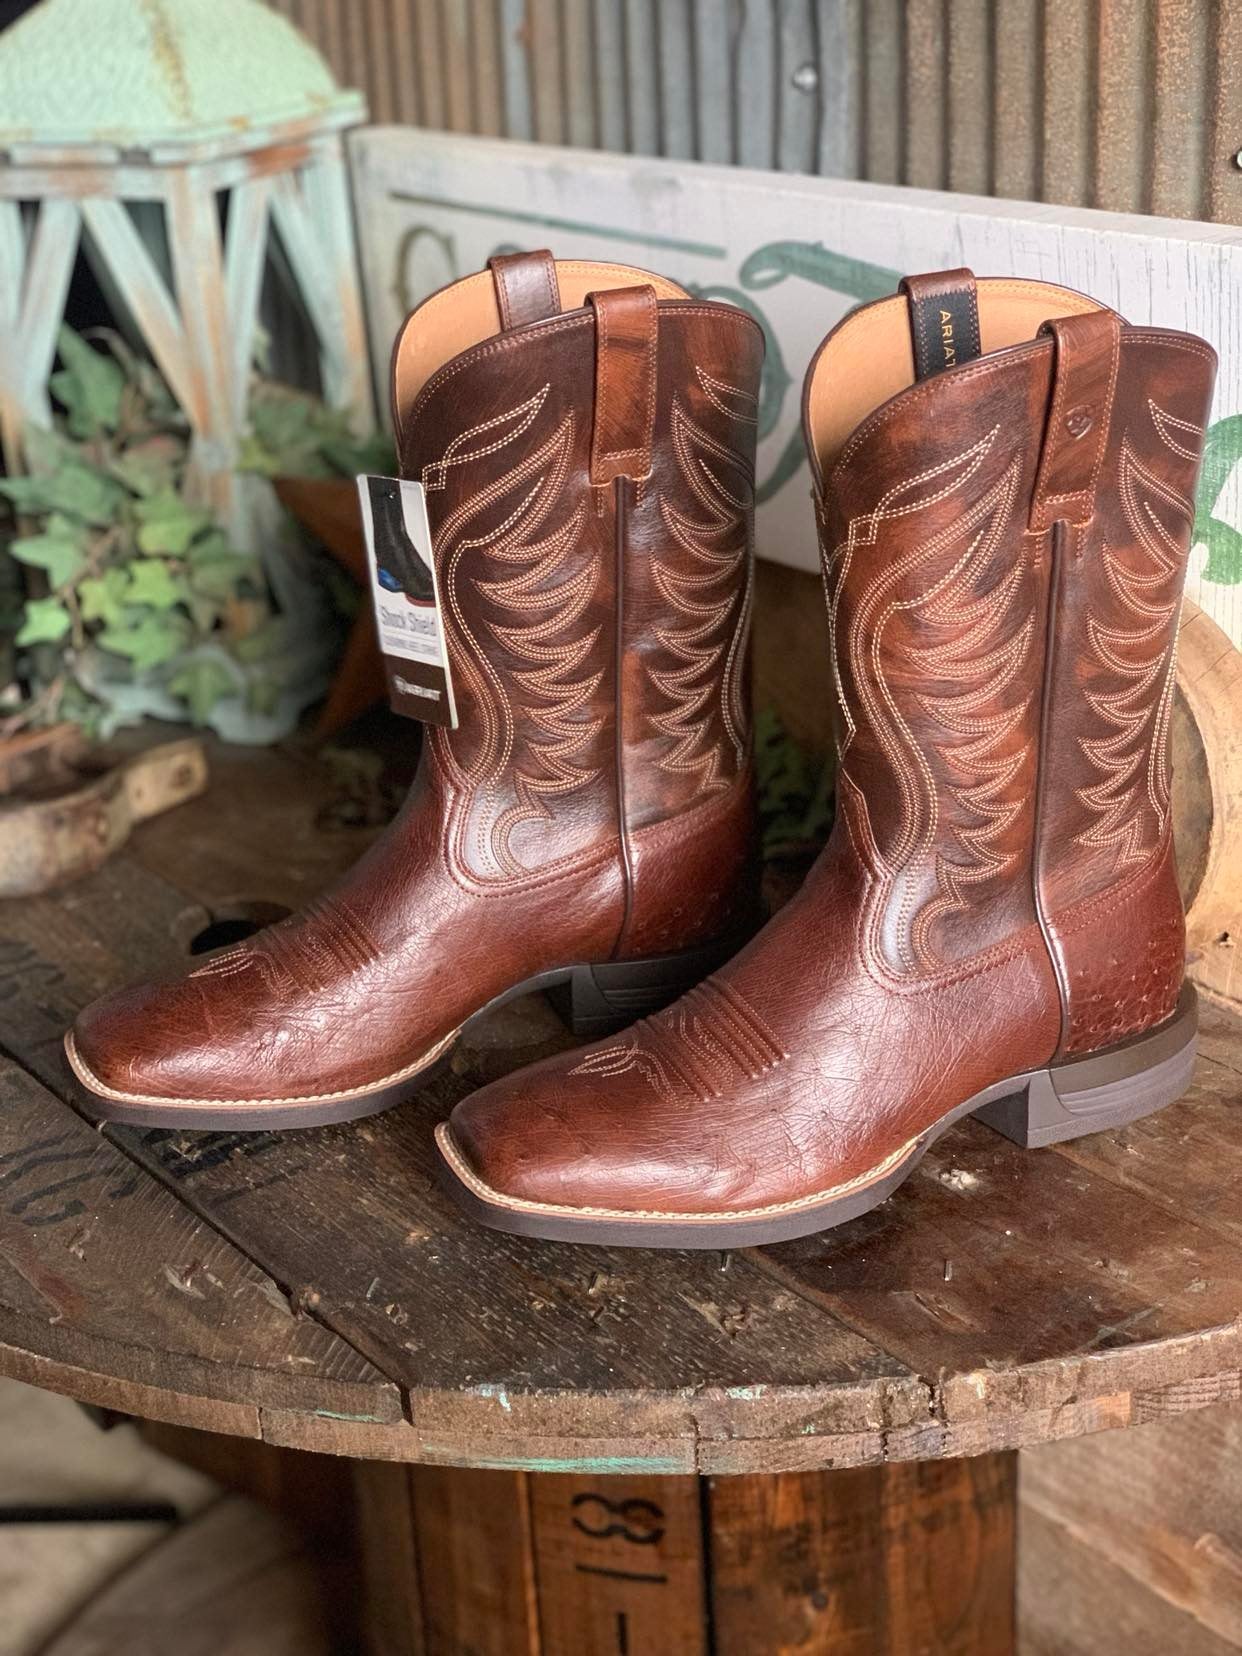 Mens Ariat Reckoning Dark Tabac Smooth Quill Ostrich / Nut Brown Square Toe Boots-Men's Boots-Ariat-Lucky J Boots & More, Women's, Men's, & Kids Western Store Located in Carthage, MO